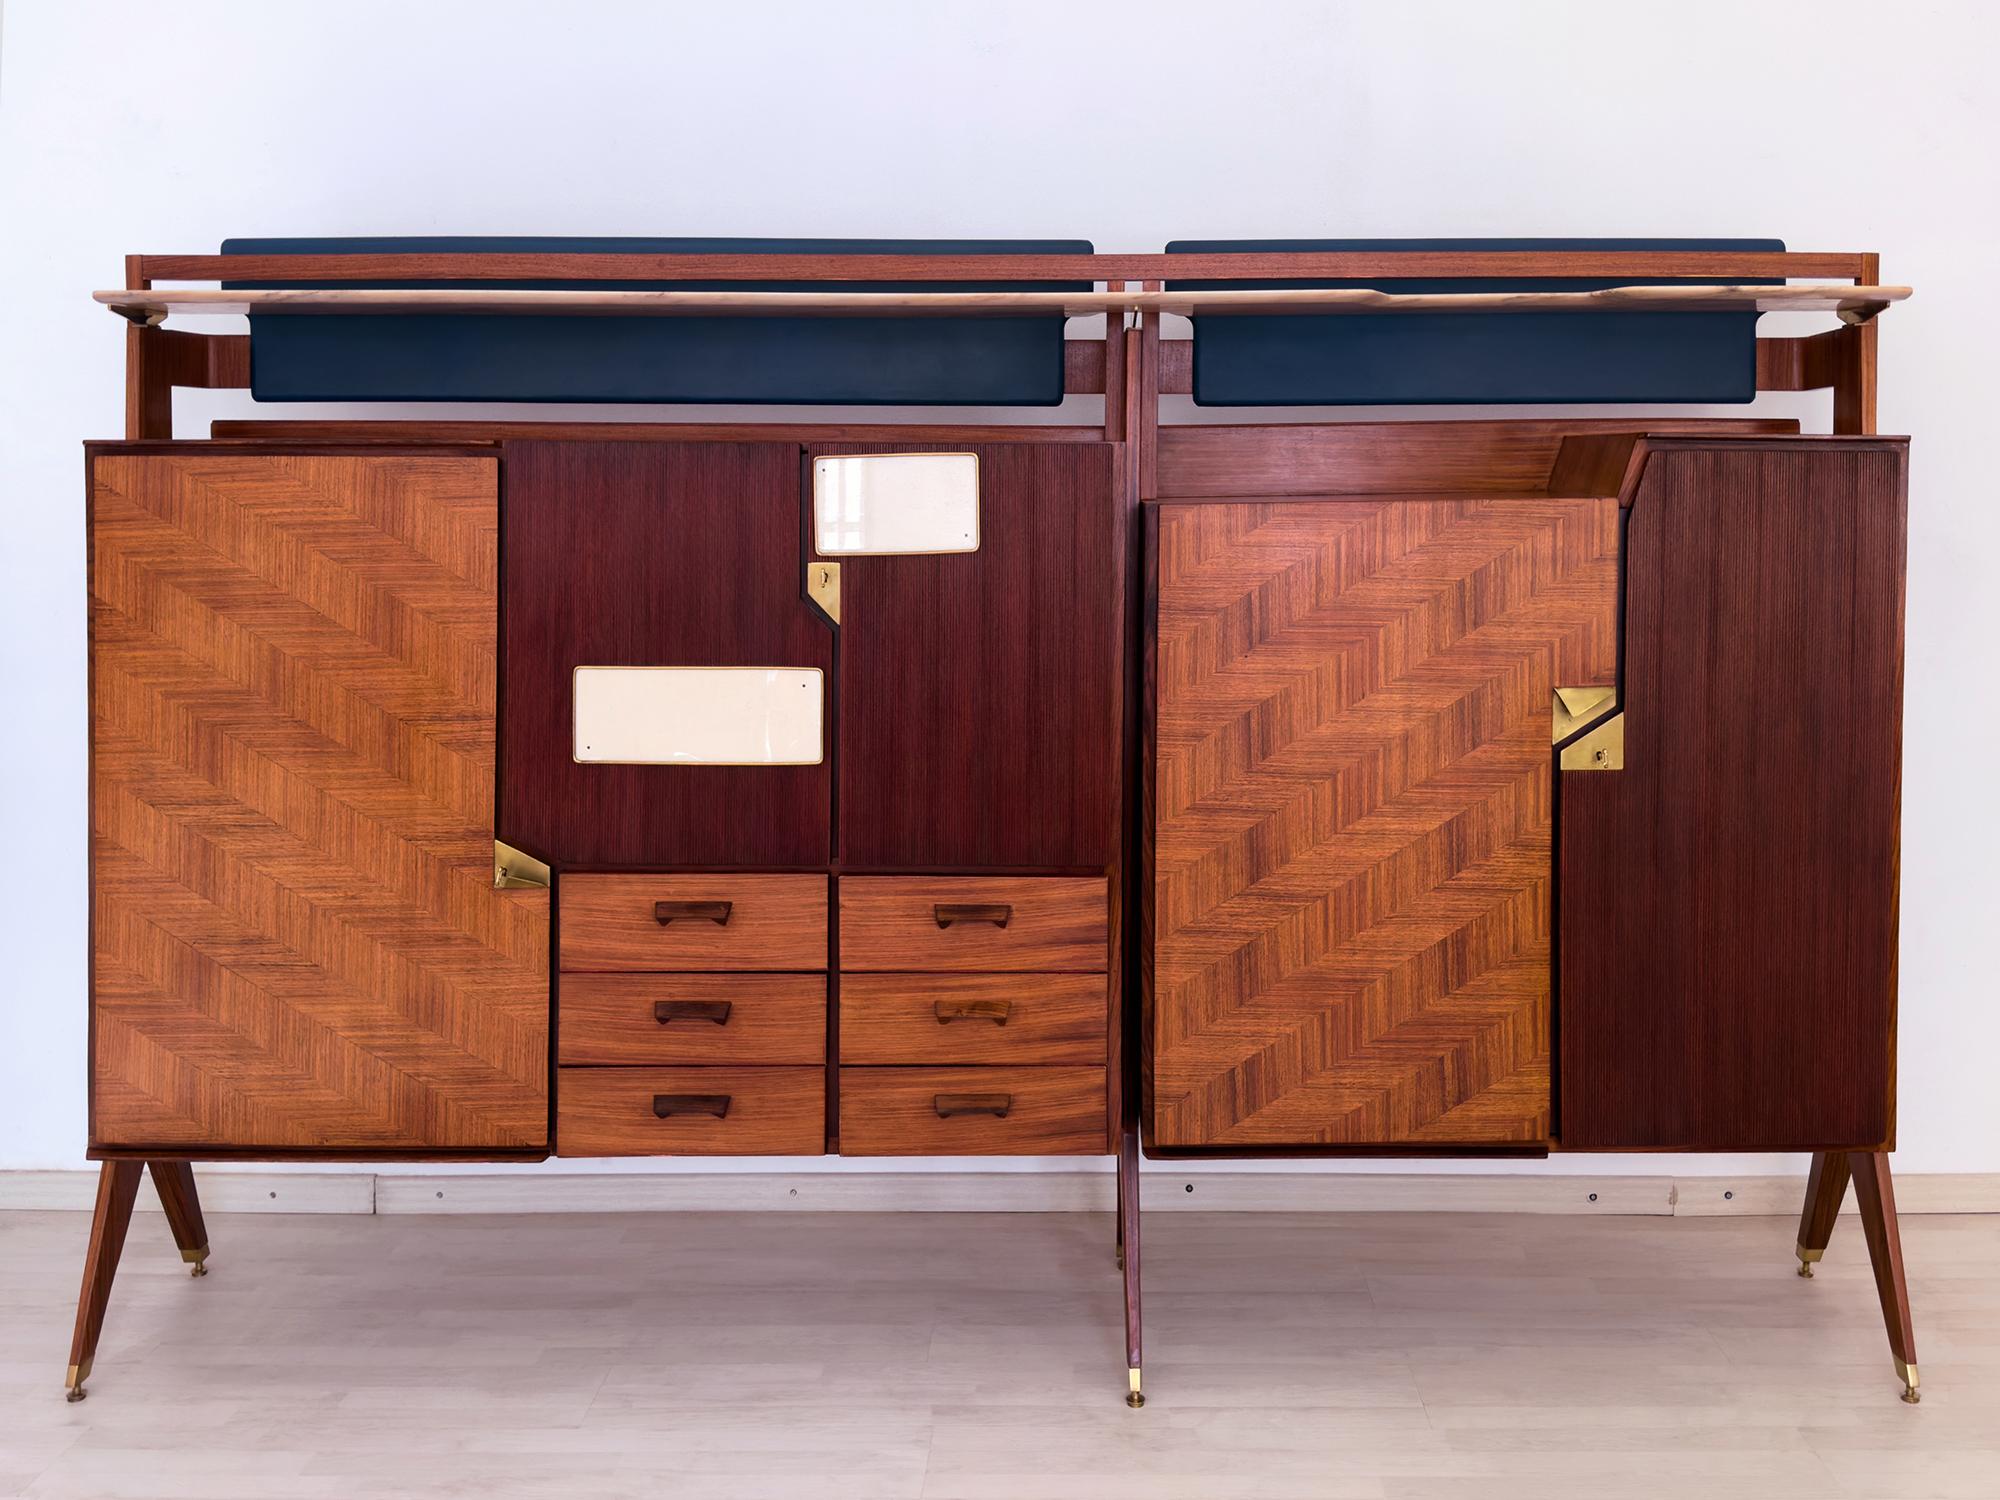 Italian Midcentury Sideboard or Bar Cabinet by La Permanente Mobili Cantù, 1950s For Sale 1